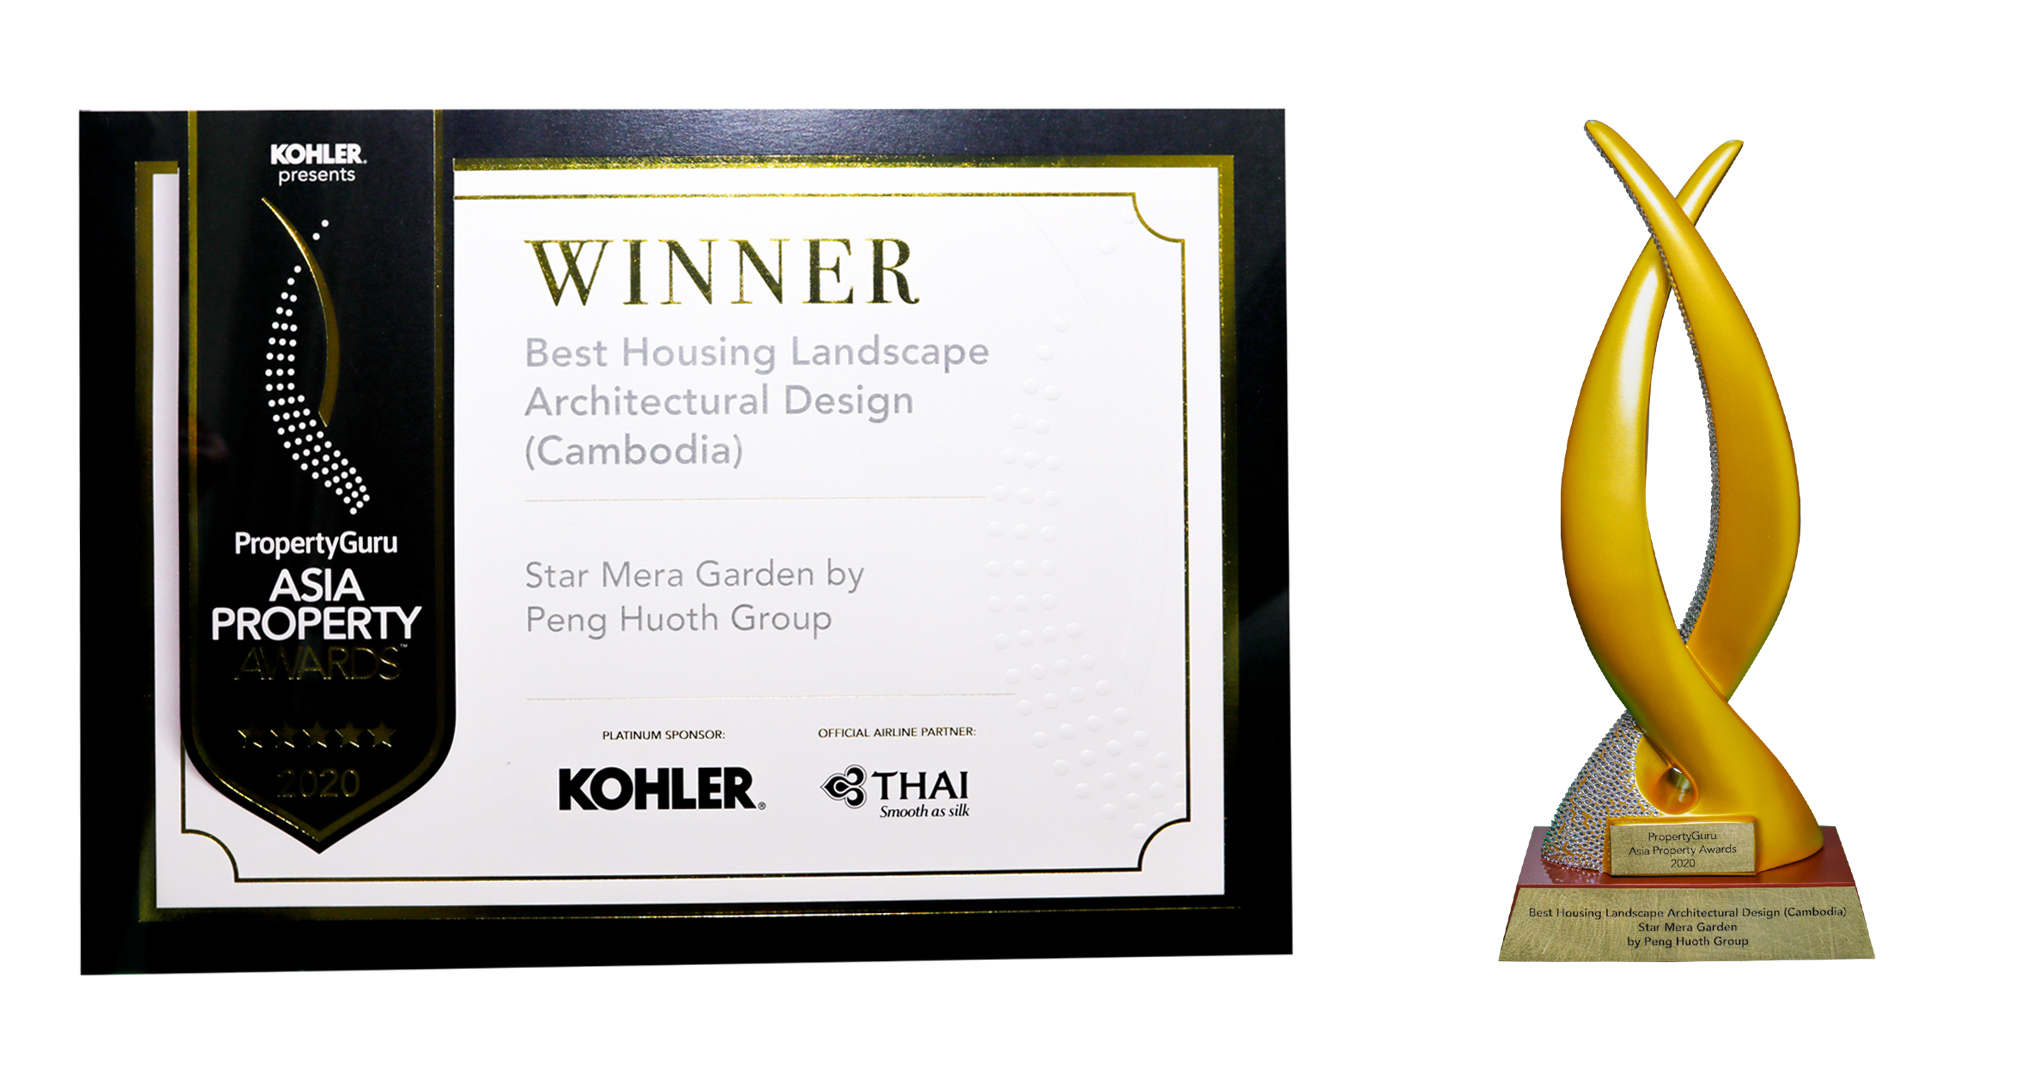 Best Housing Landscape Architectural Design (Cambodia) The Star Mera Garden by Peng Huoth Group